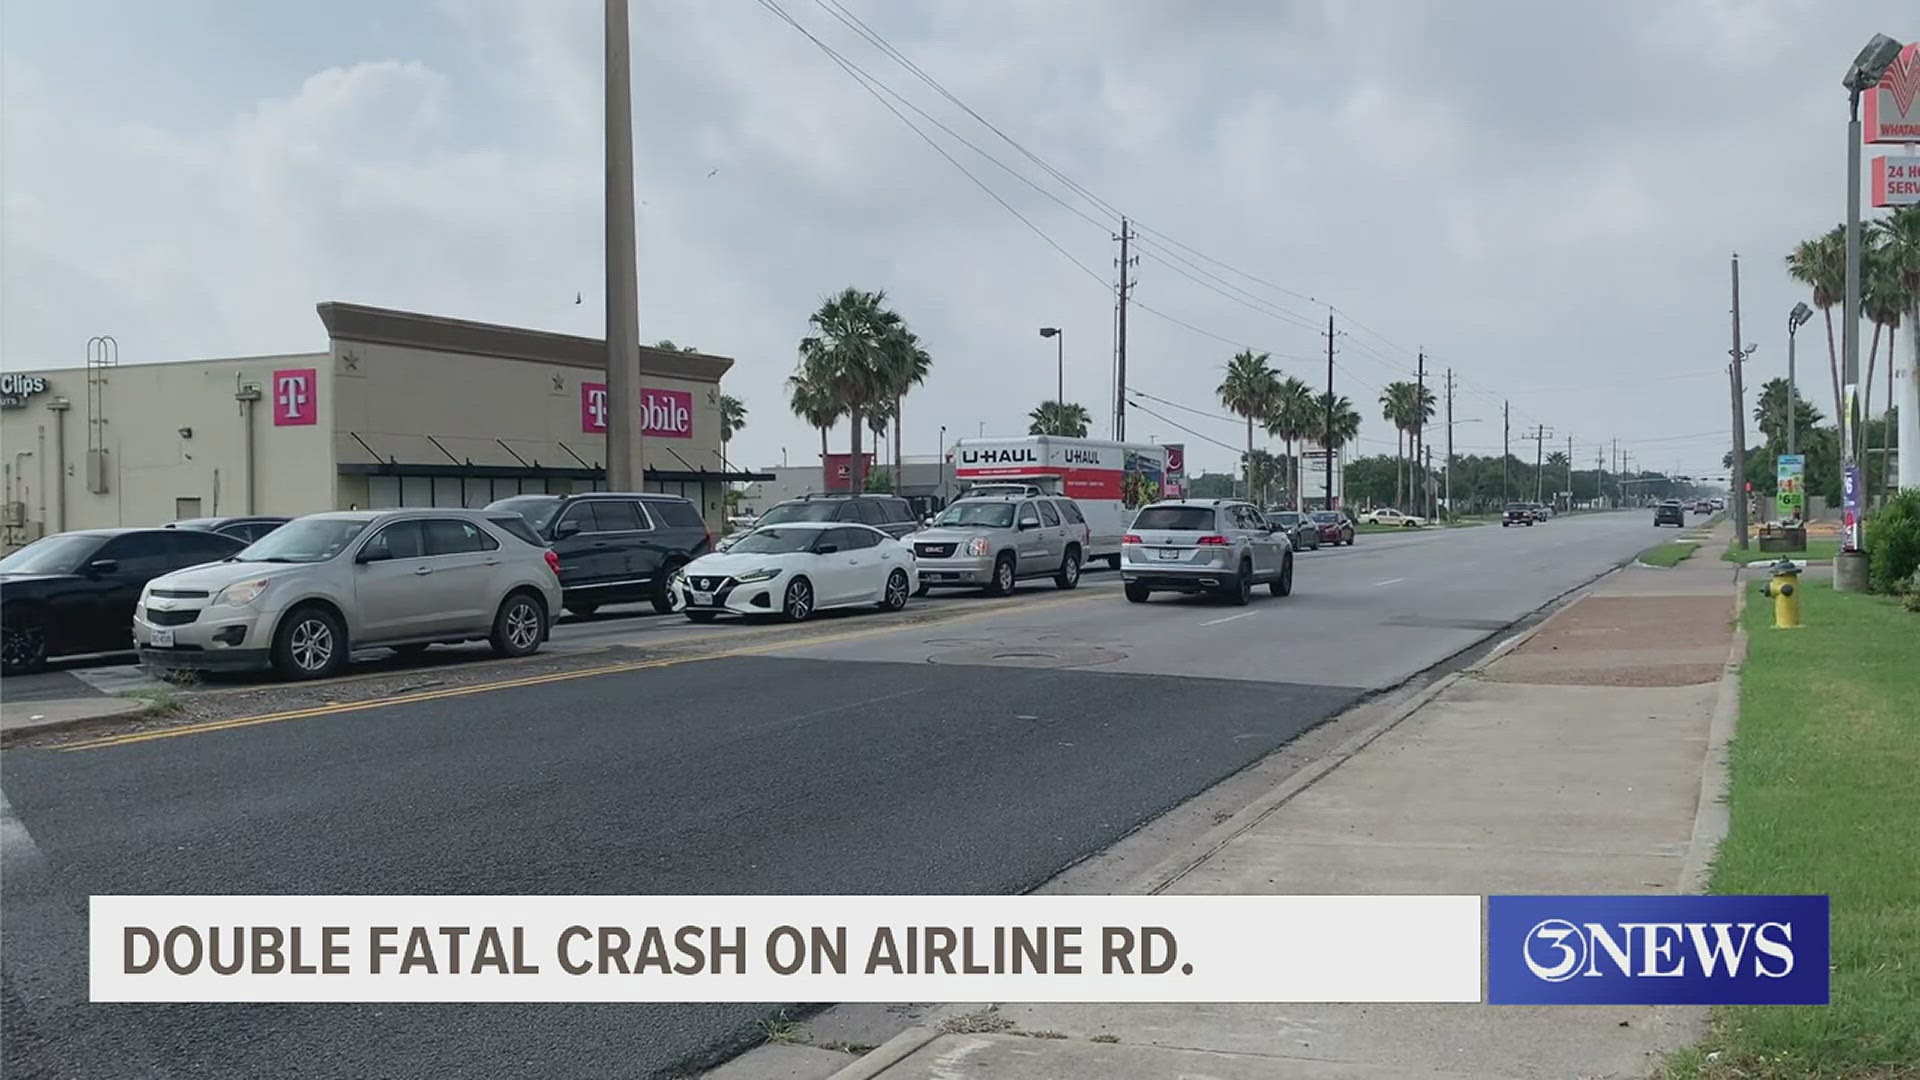 A major car crash on Airline Road leaves two dead